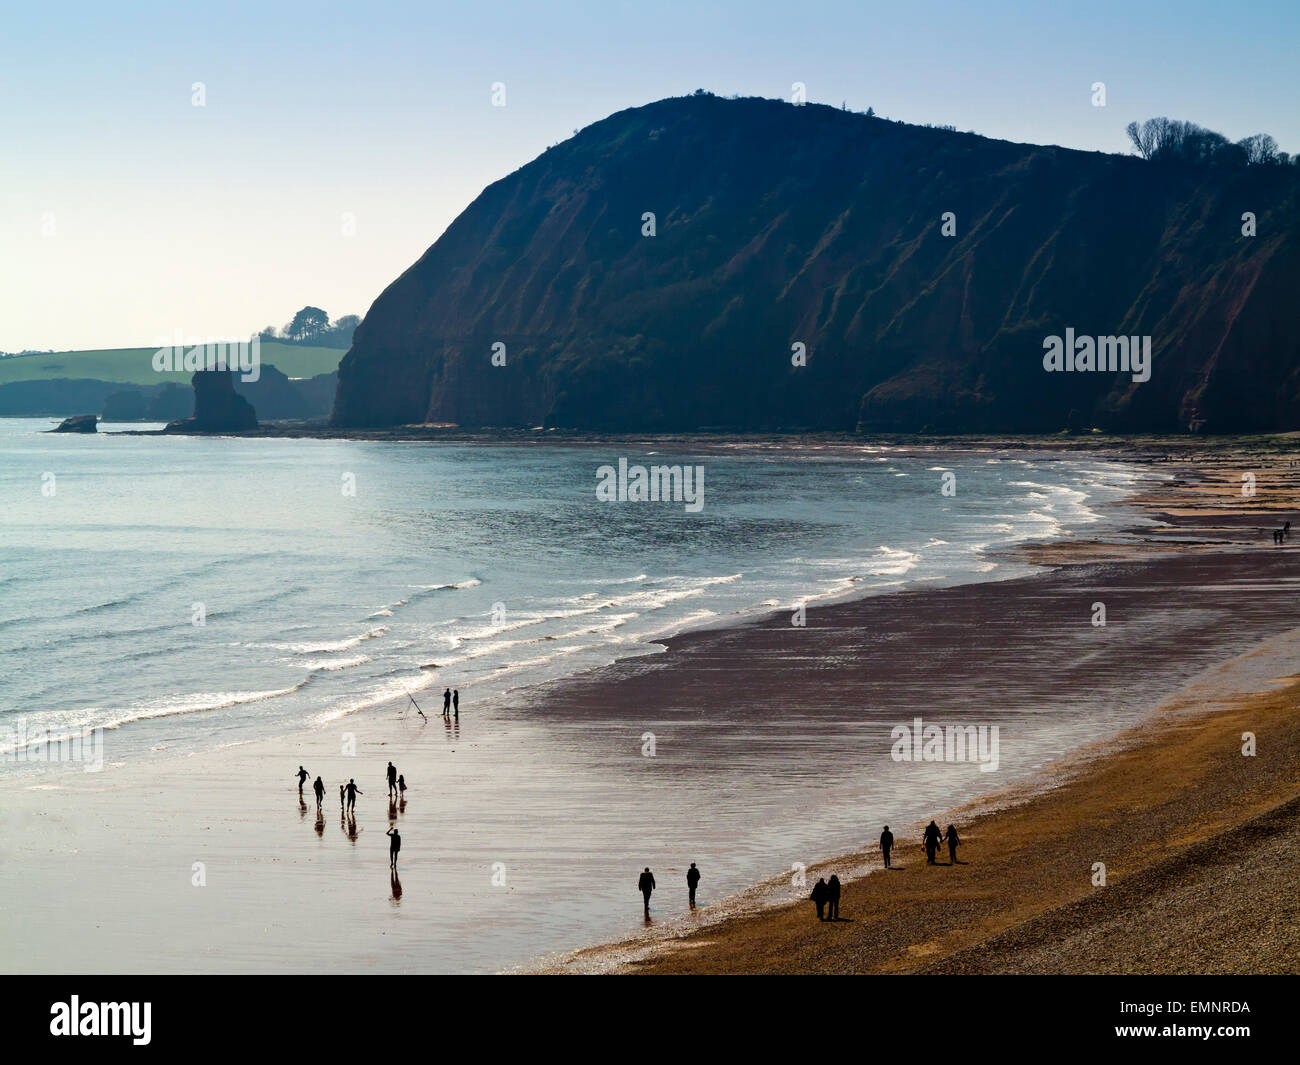 View looking down on to the beach at Sidmouth a popular holiday resort on the Jurassic Coast in south Devon England UK Stock Photo